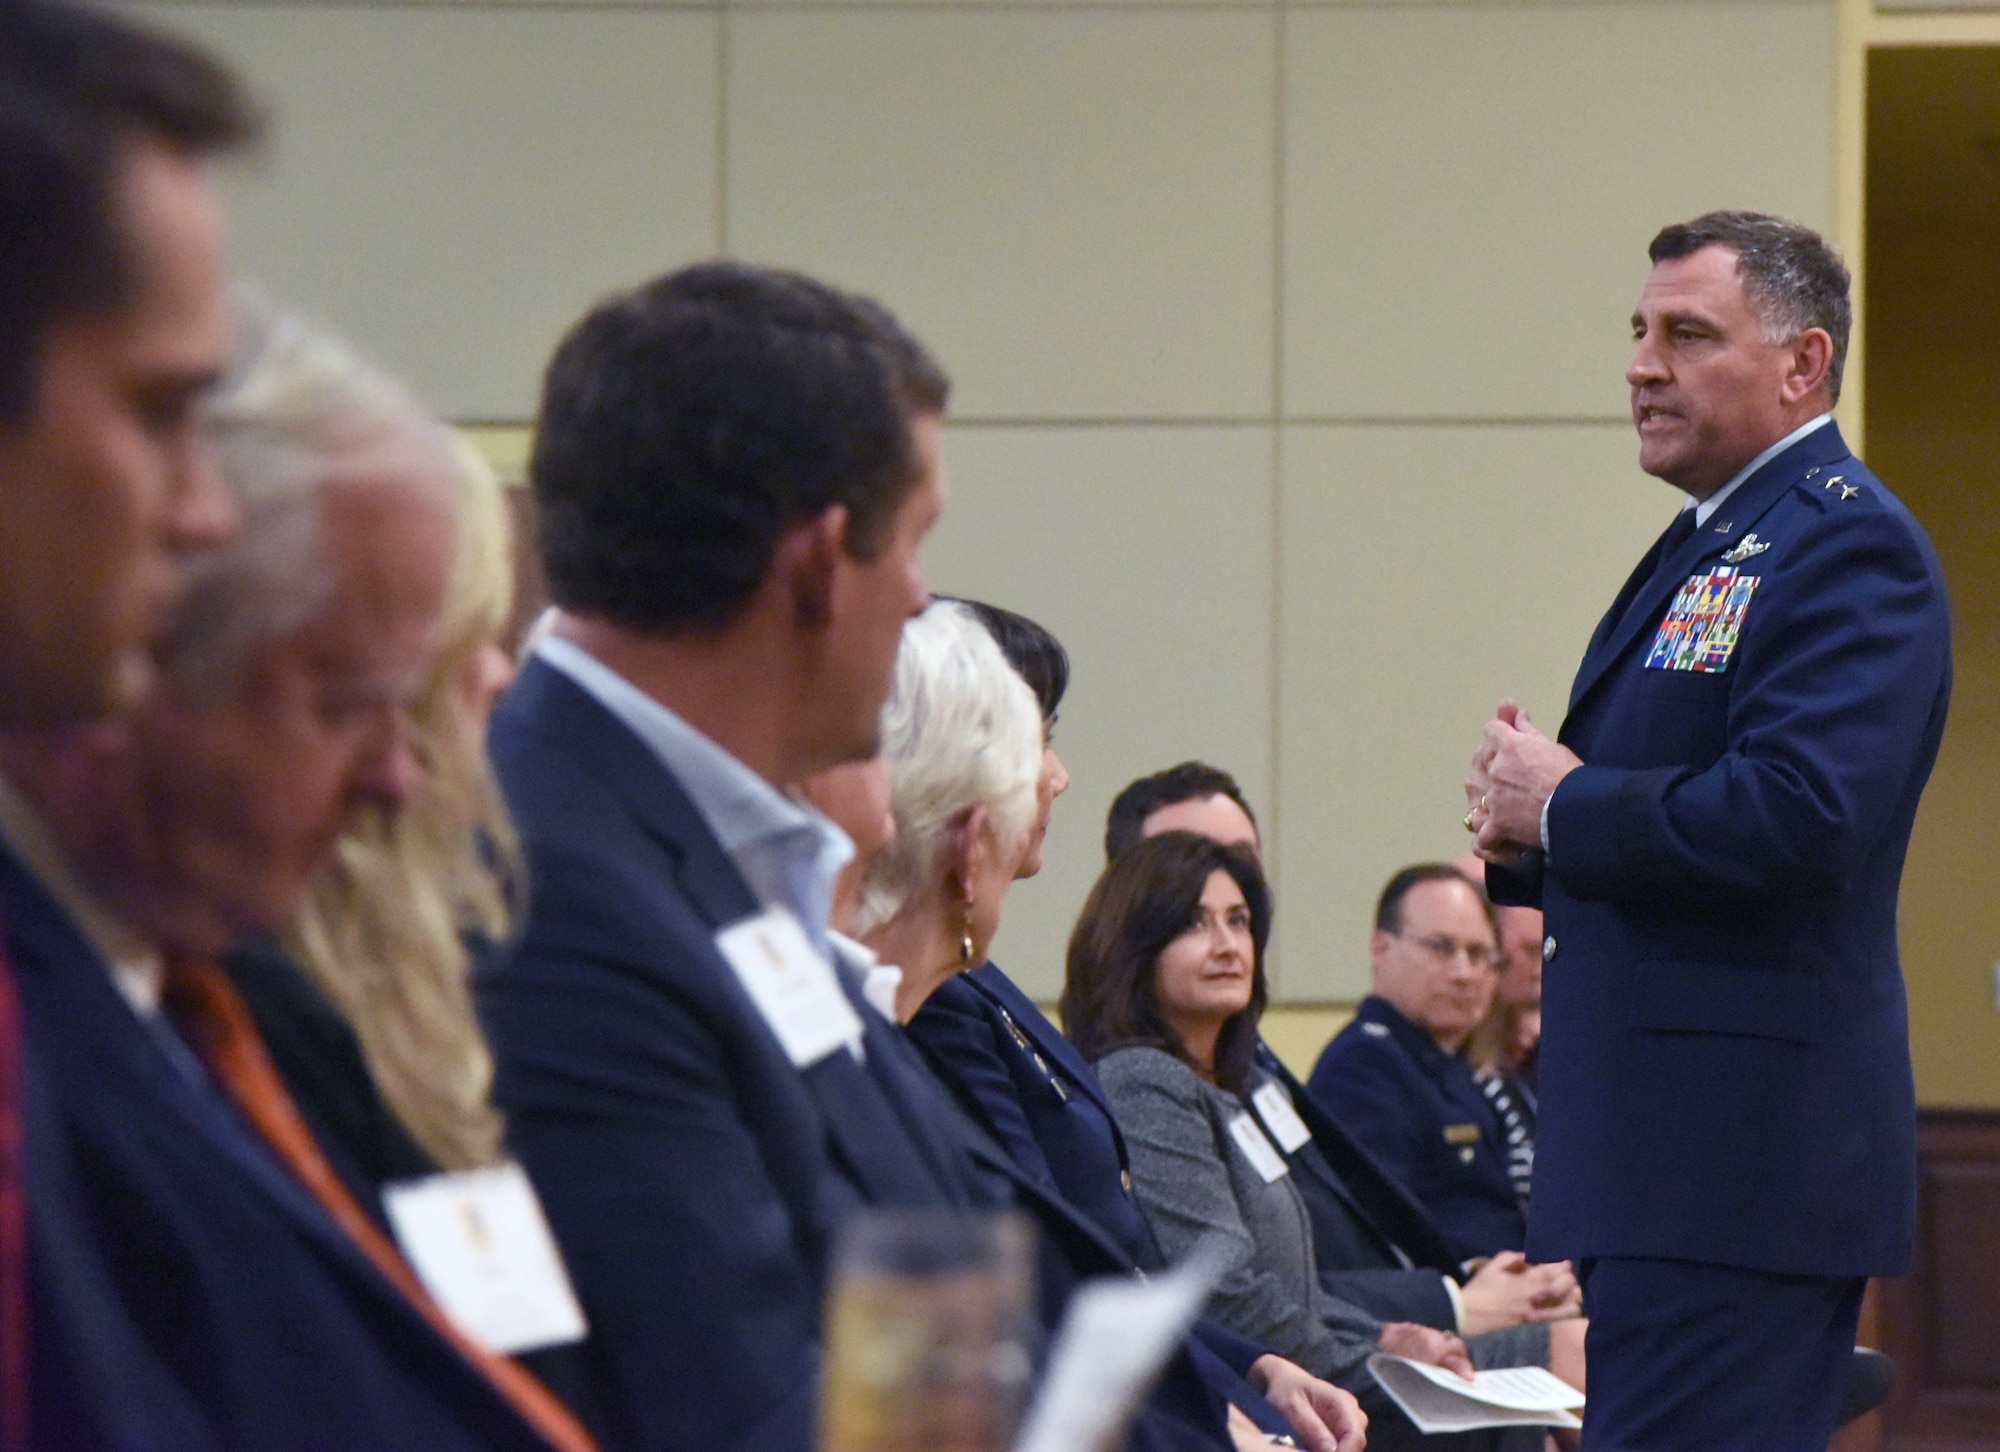 U.S. Air Force Maj. Gen. Timothy Leahy, 2nd Air Force commander, delivers remarks during the 2019 Honorary Commander Induction Ceremony inside the Bay Breeze Event Center at Keesler Air Force Base, Mississippi, Feb. 9, 2019. The event recognized the newest members of Keesler's honorary commander program, which is a partnership between military commanders and local civic and business leaders in order to enrich and strengthen the relationship between the base and the community. This was the first time leadership from the 2nd Air Force, 81st Training Wing and 403rd Wing combined to host a single joint induction ceremony. (U.S. Air Force photo by Kemberly Groue)